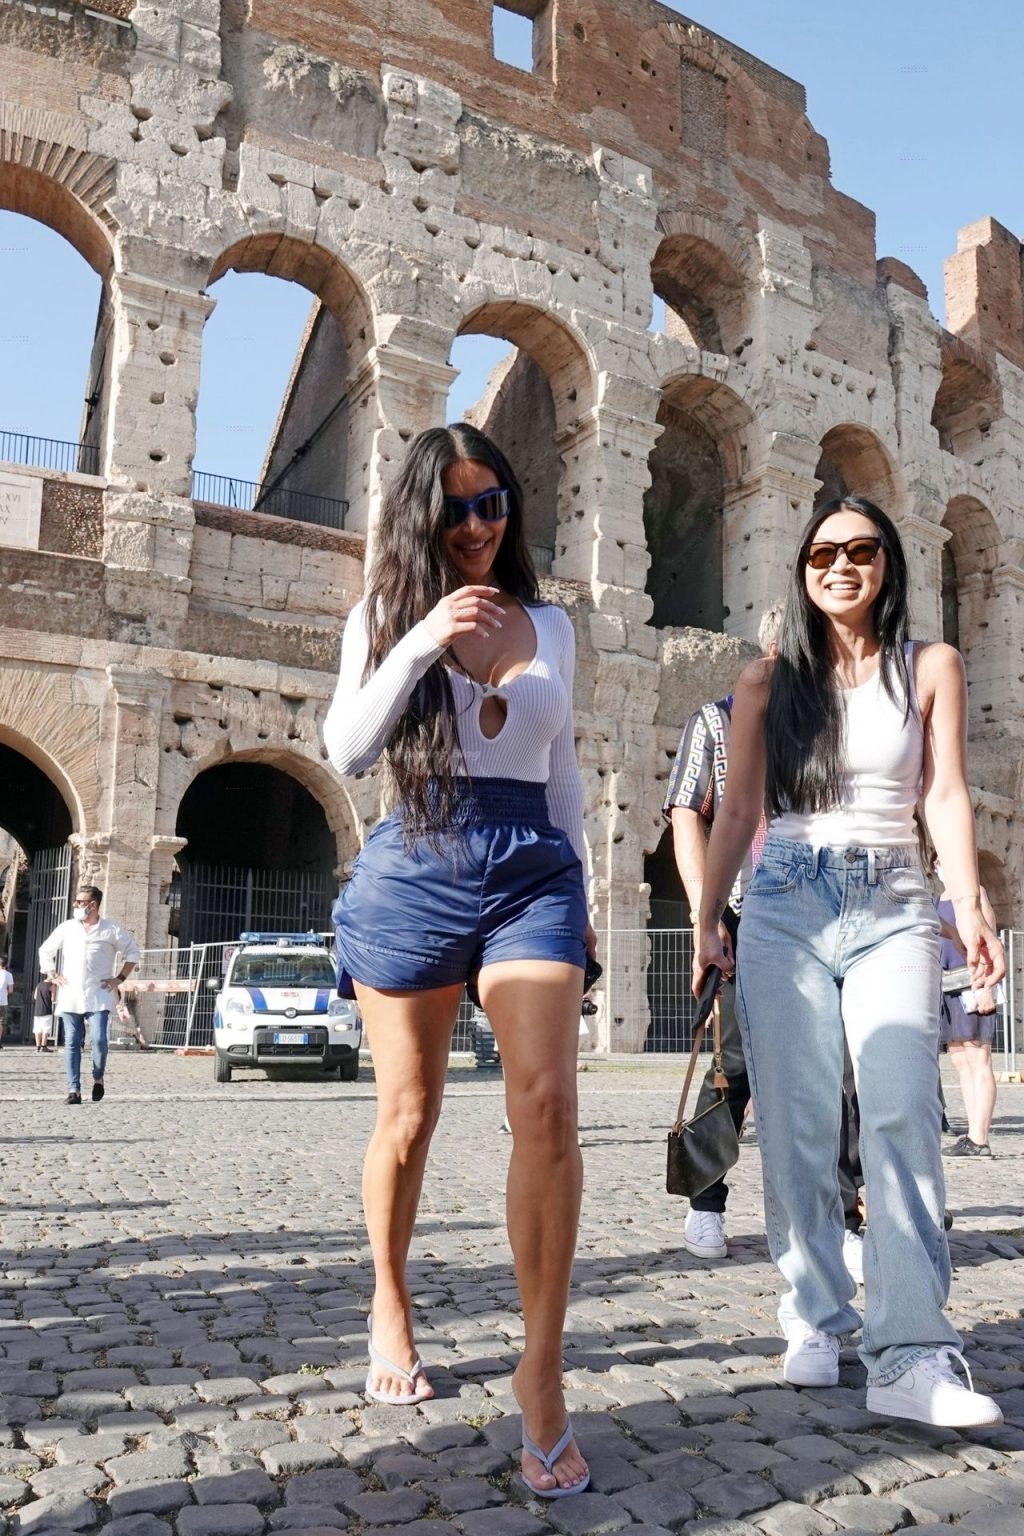 Kim Kardashian is Pictured Sightseeing in Rome (78 Photos) [Updated]